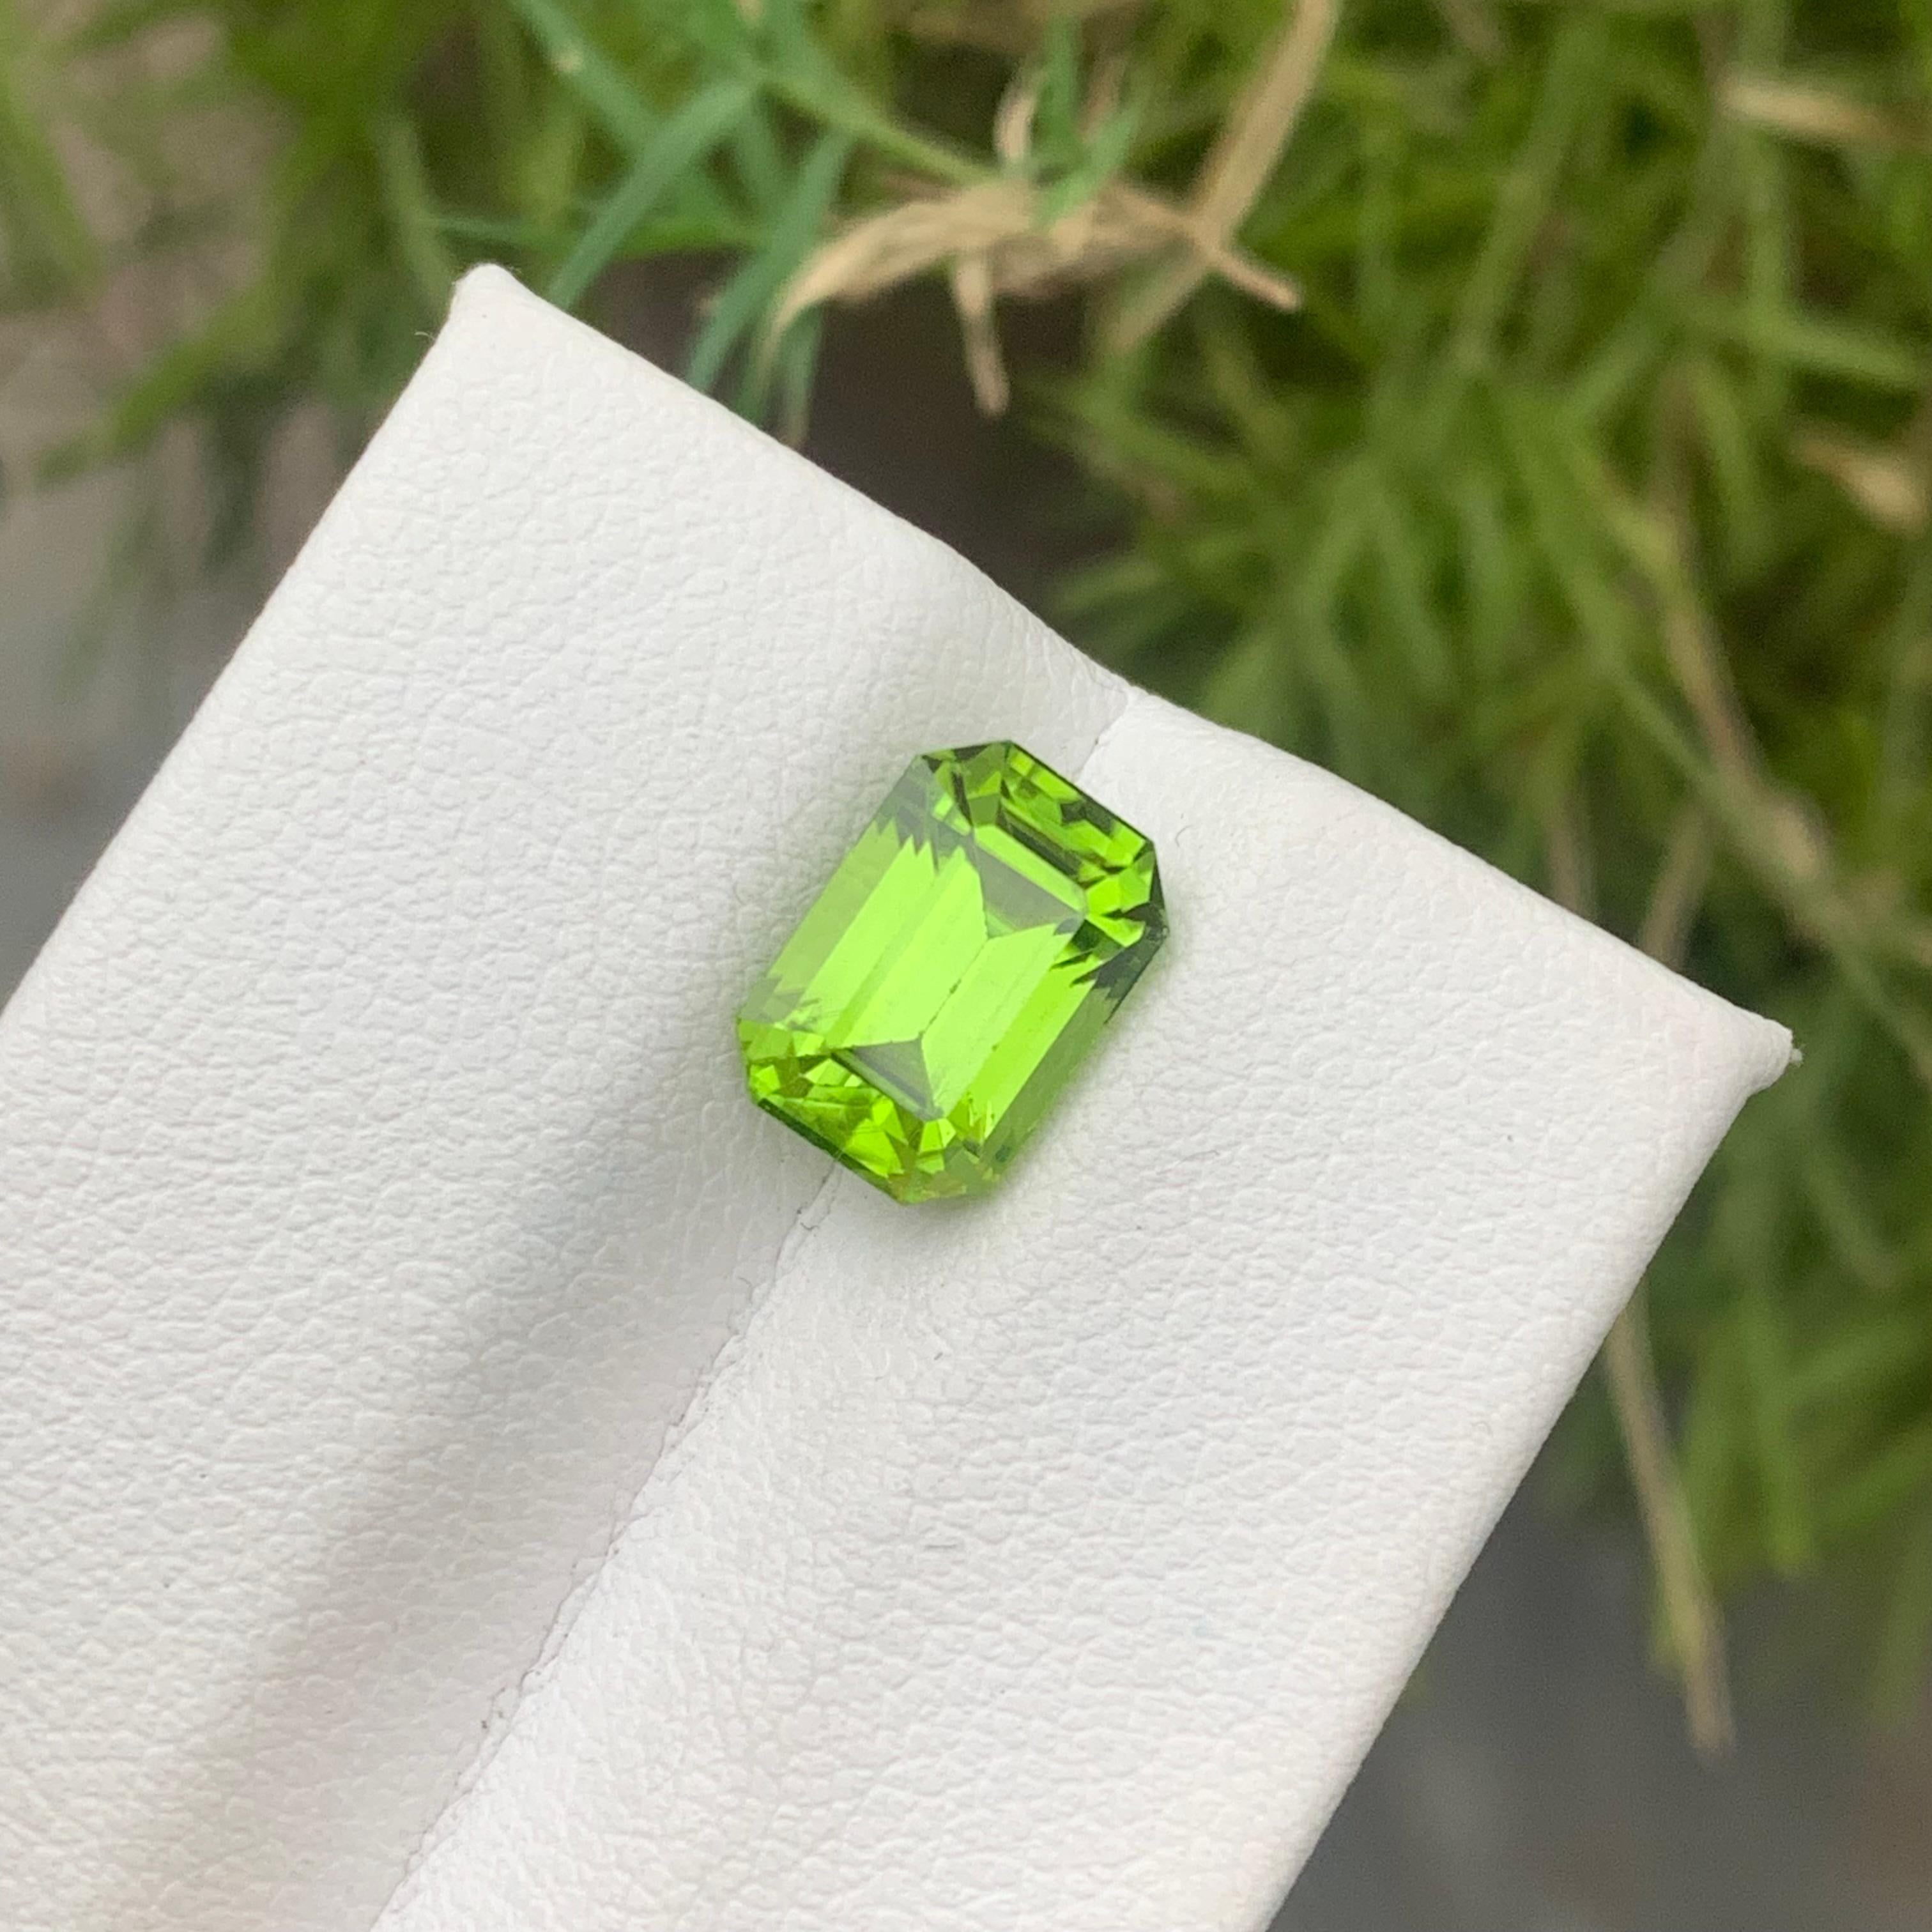 Emerald Cut Gorgeous 3.35 Carat Natural Loose Green Peridot Gemstone from Pakistani Mine For Sale